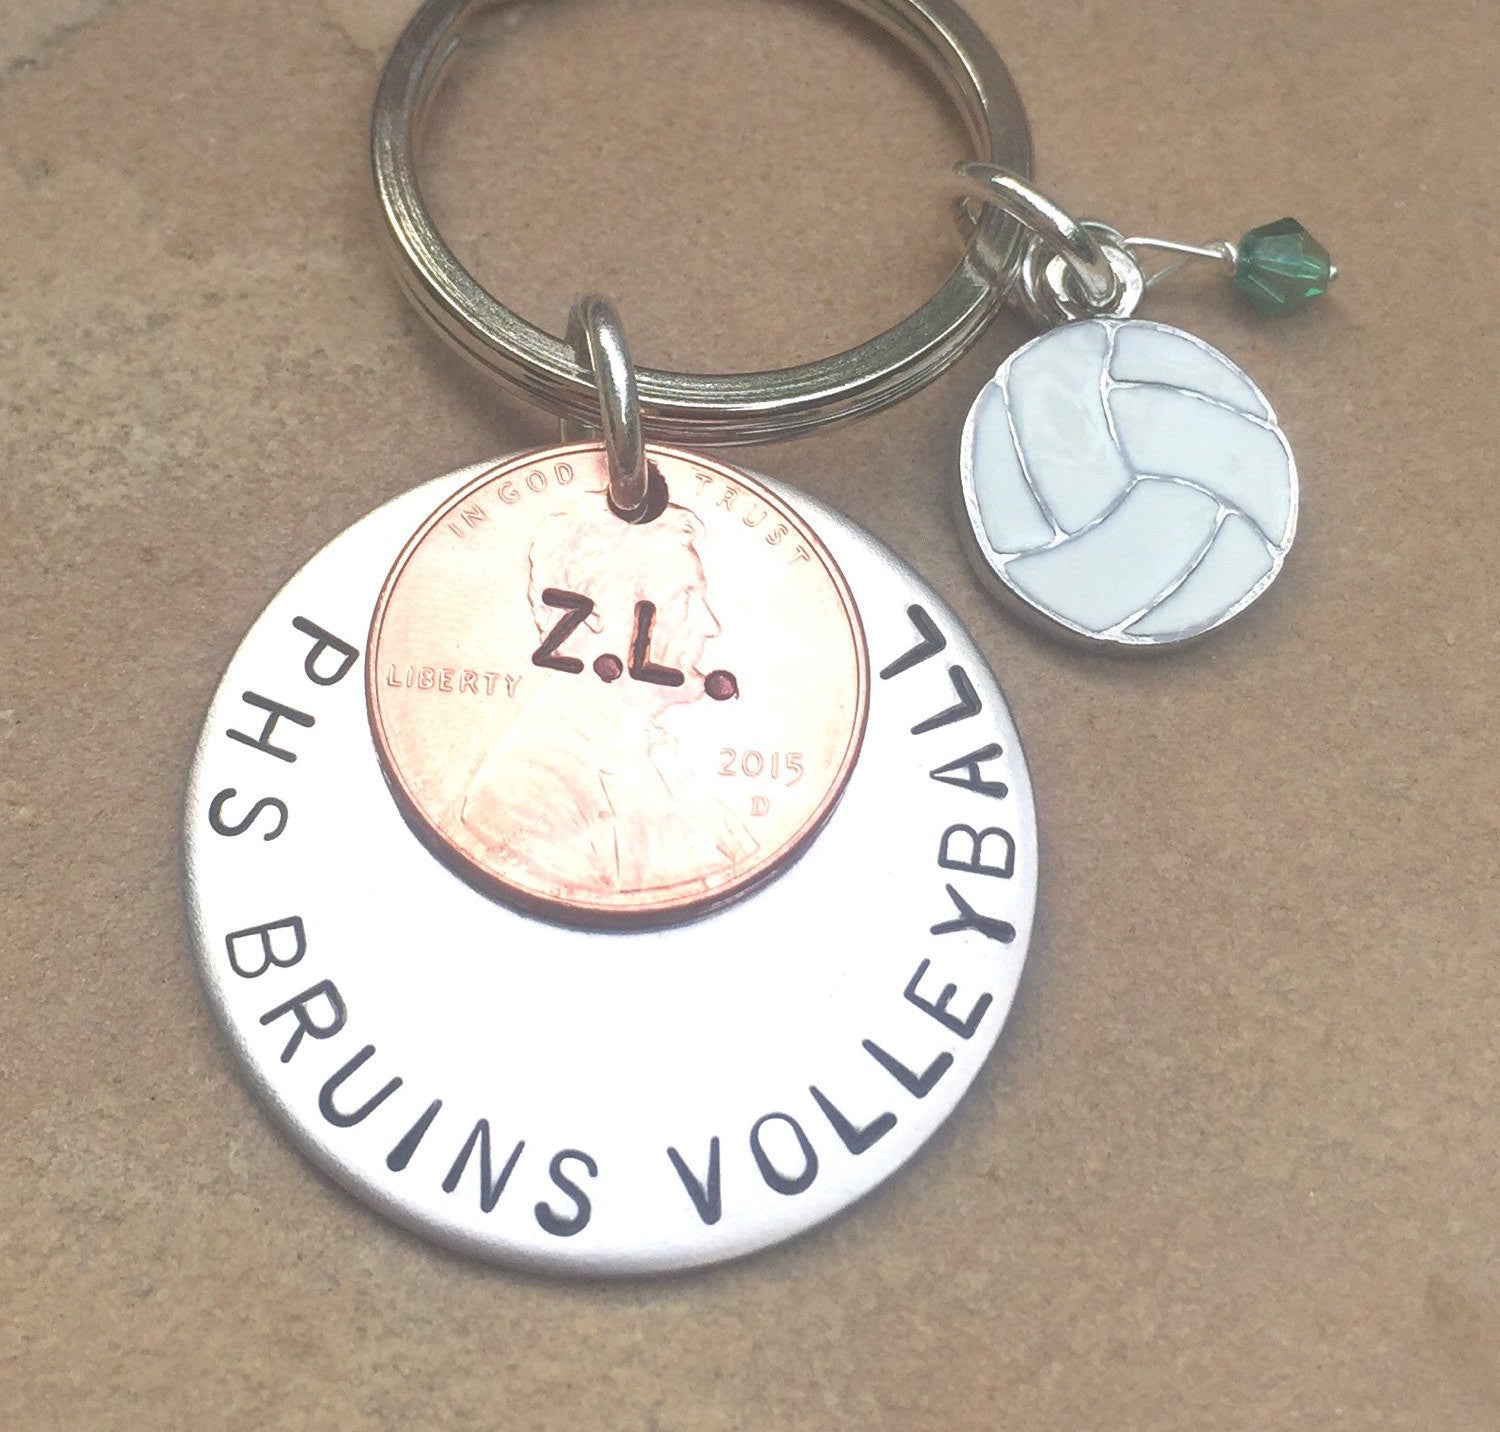 High School Gifts, Christmas Gift, High School Sports Keychain, Volleyball Keychain, Personalized High School Sport Keychain, Football - Natashaaloha, jewelry, bracelets, necklace, keychains, fishing lures, gifts for men, charms, personalized, 